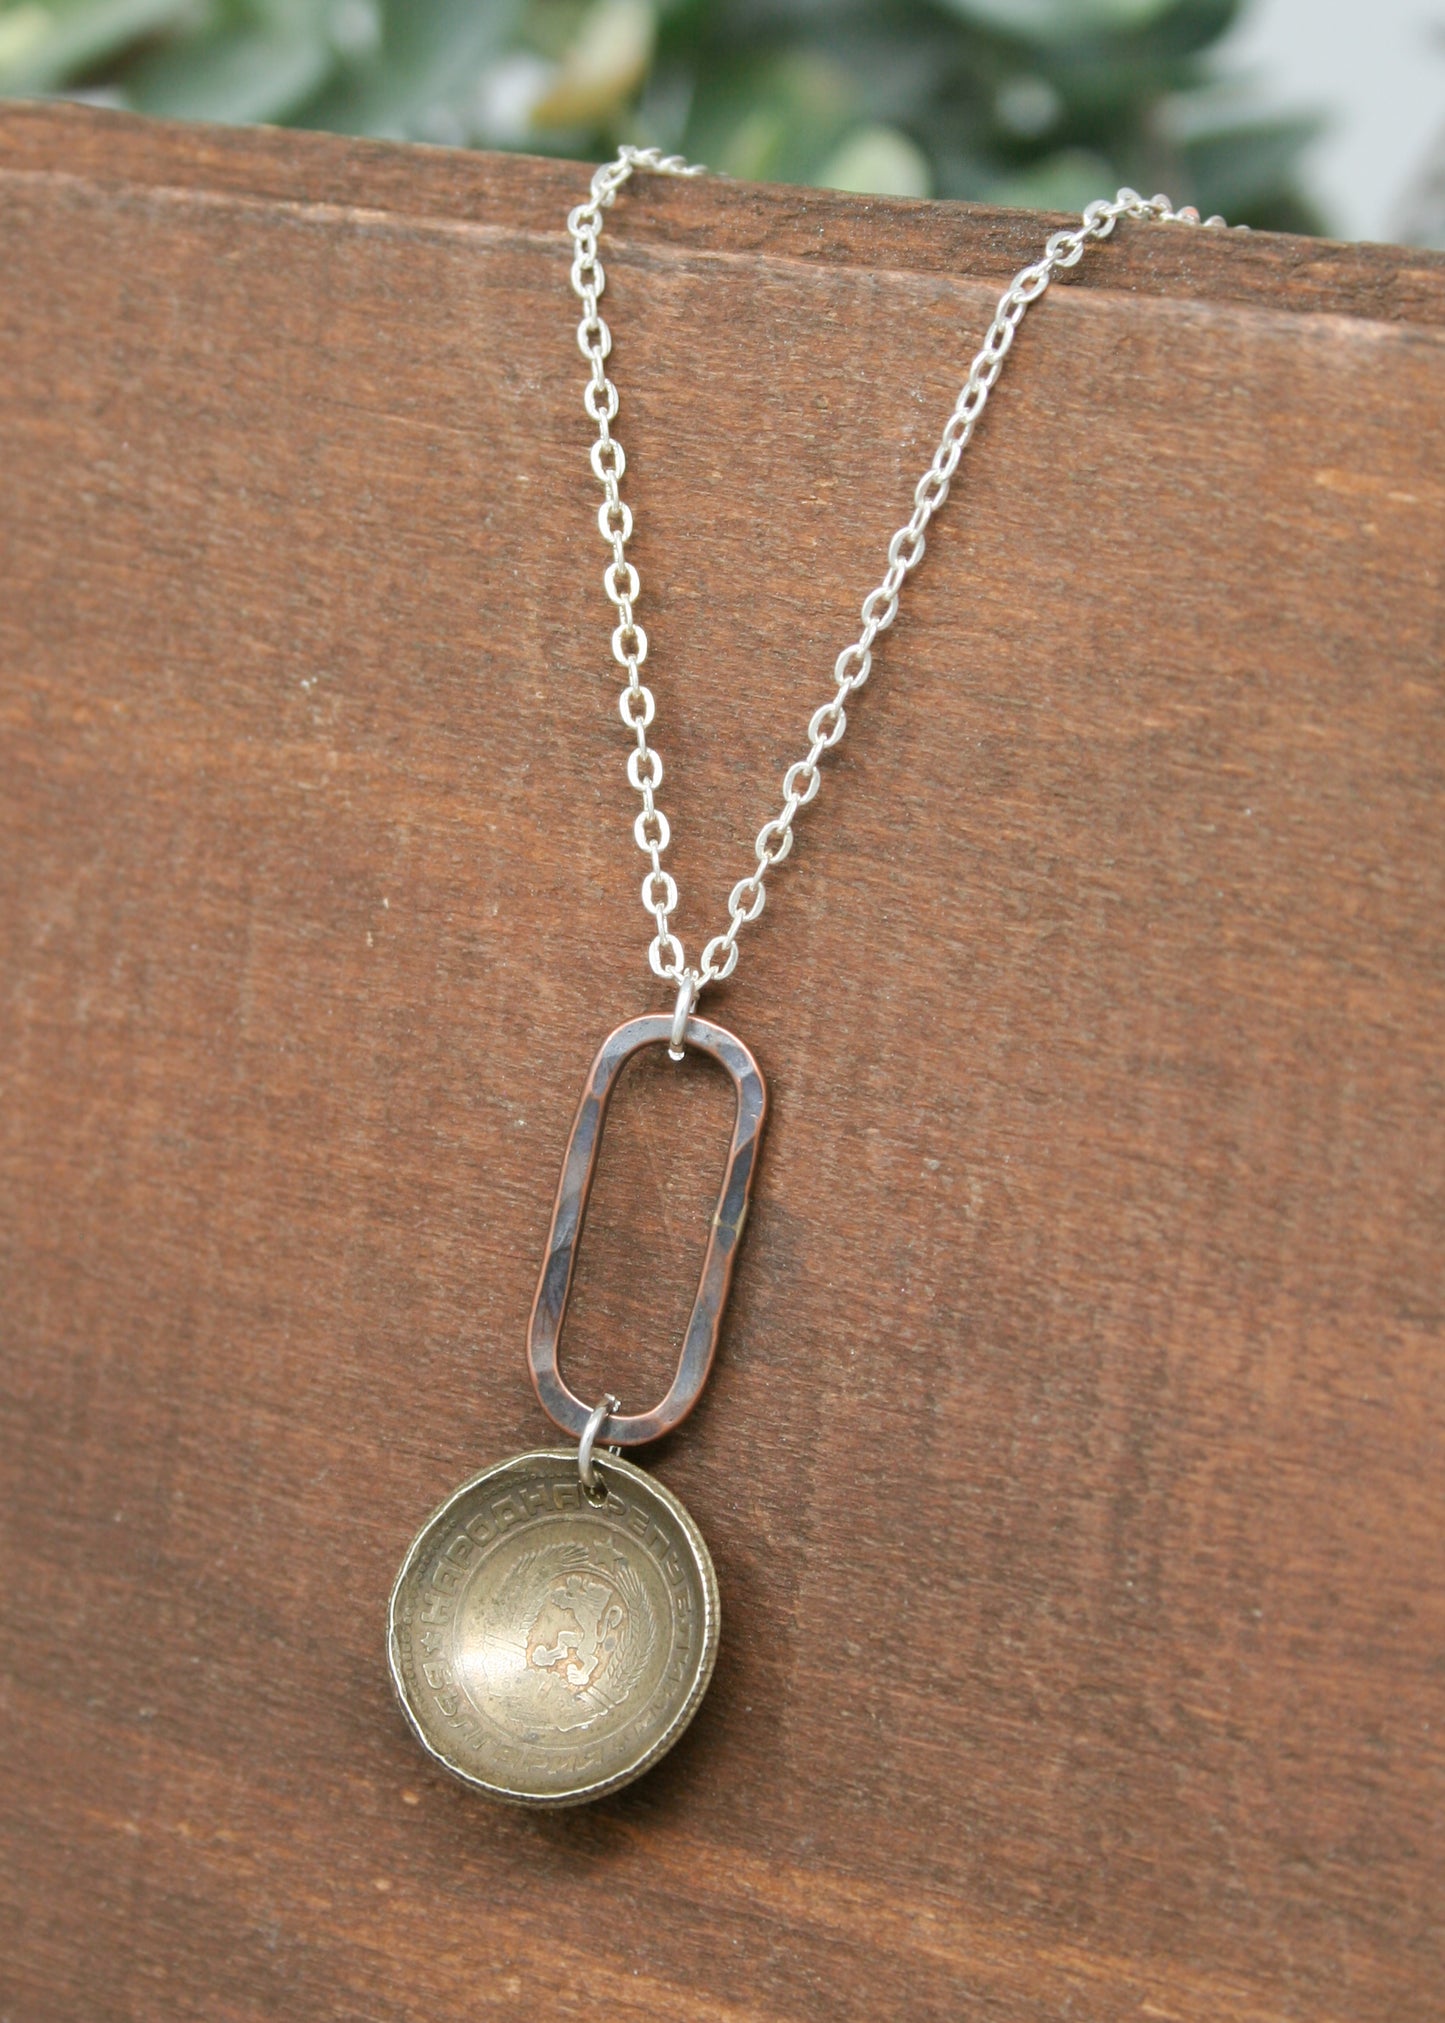 a silver necklace with a small metal object hanging from it